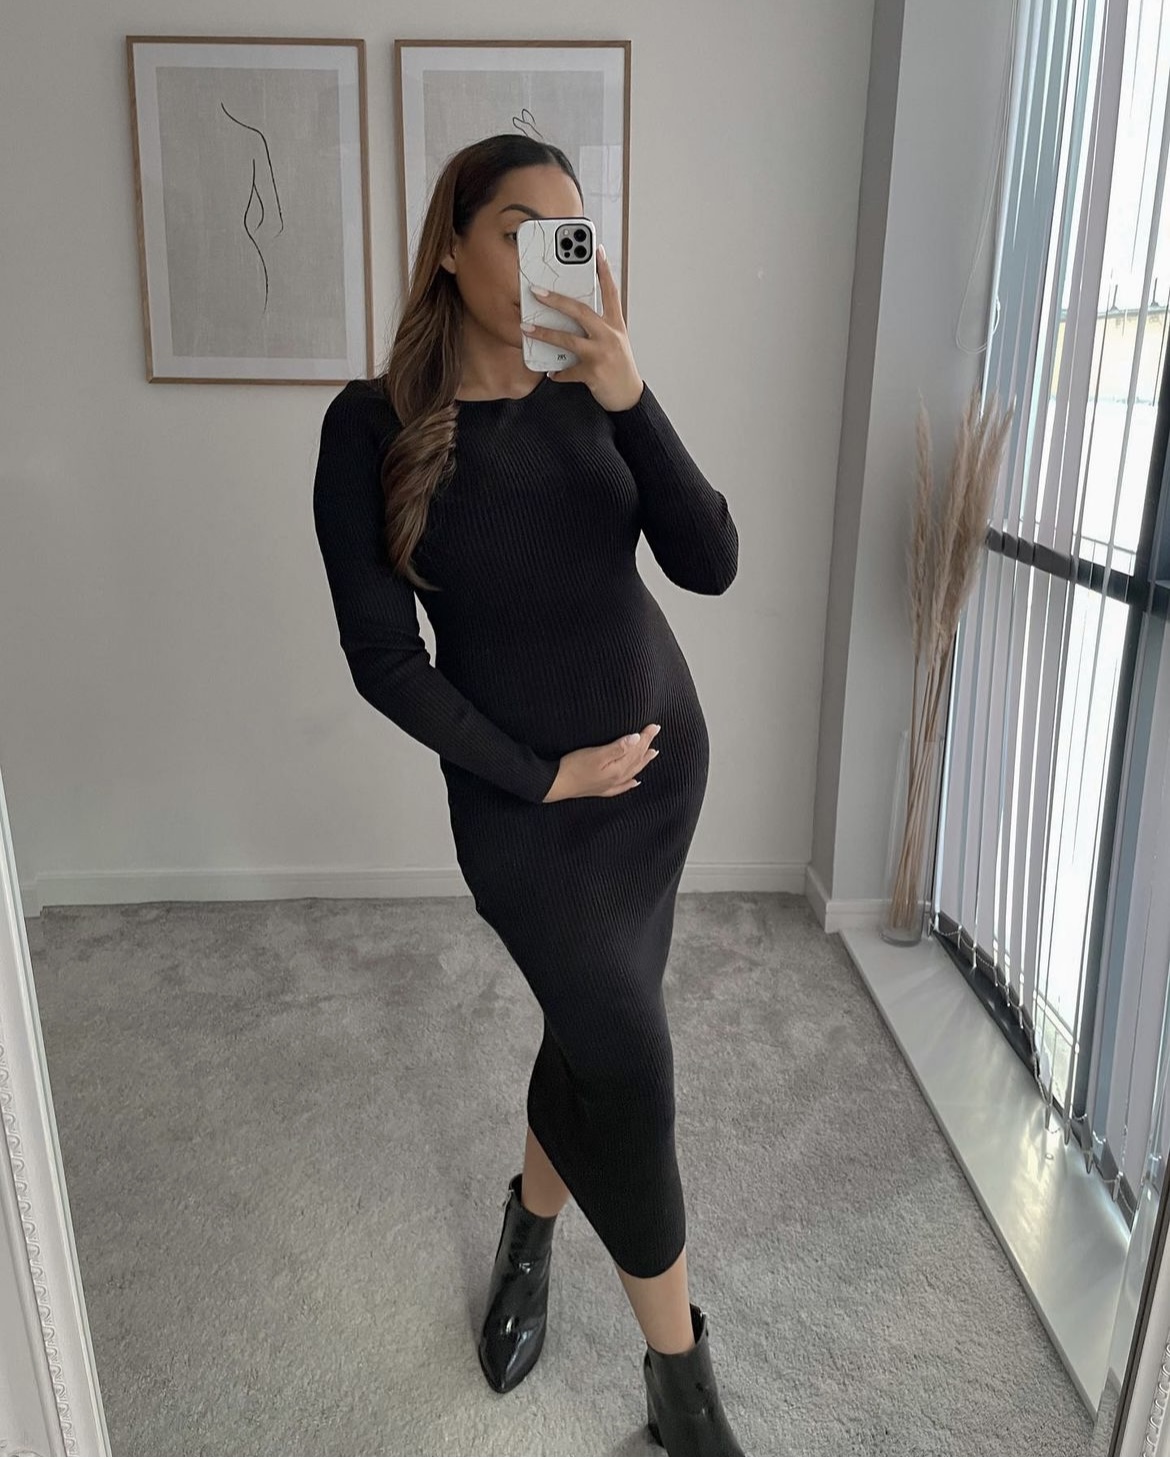 Five Cute Pregnancy Outfits for When You're In Your Ninth Month